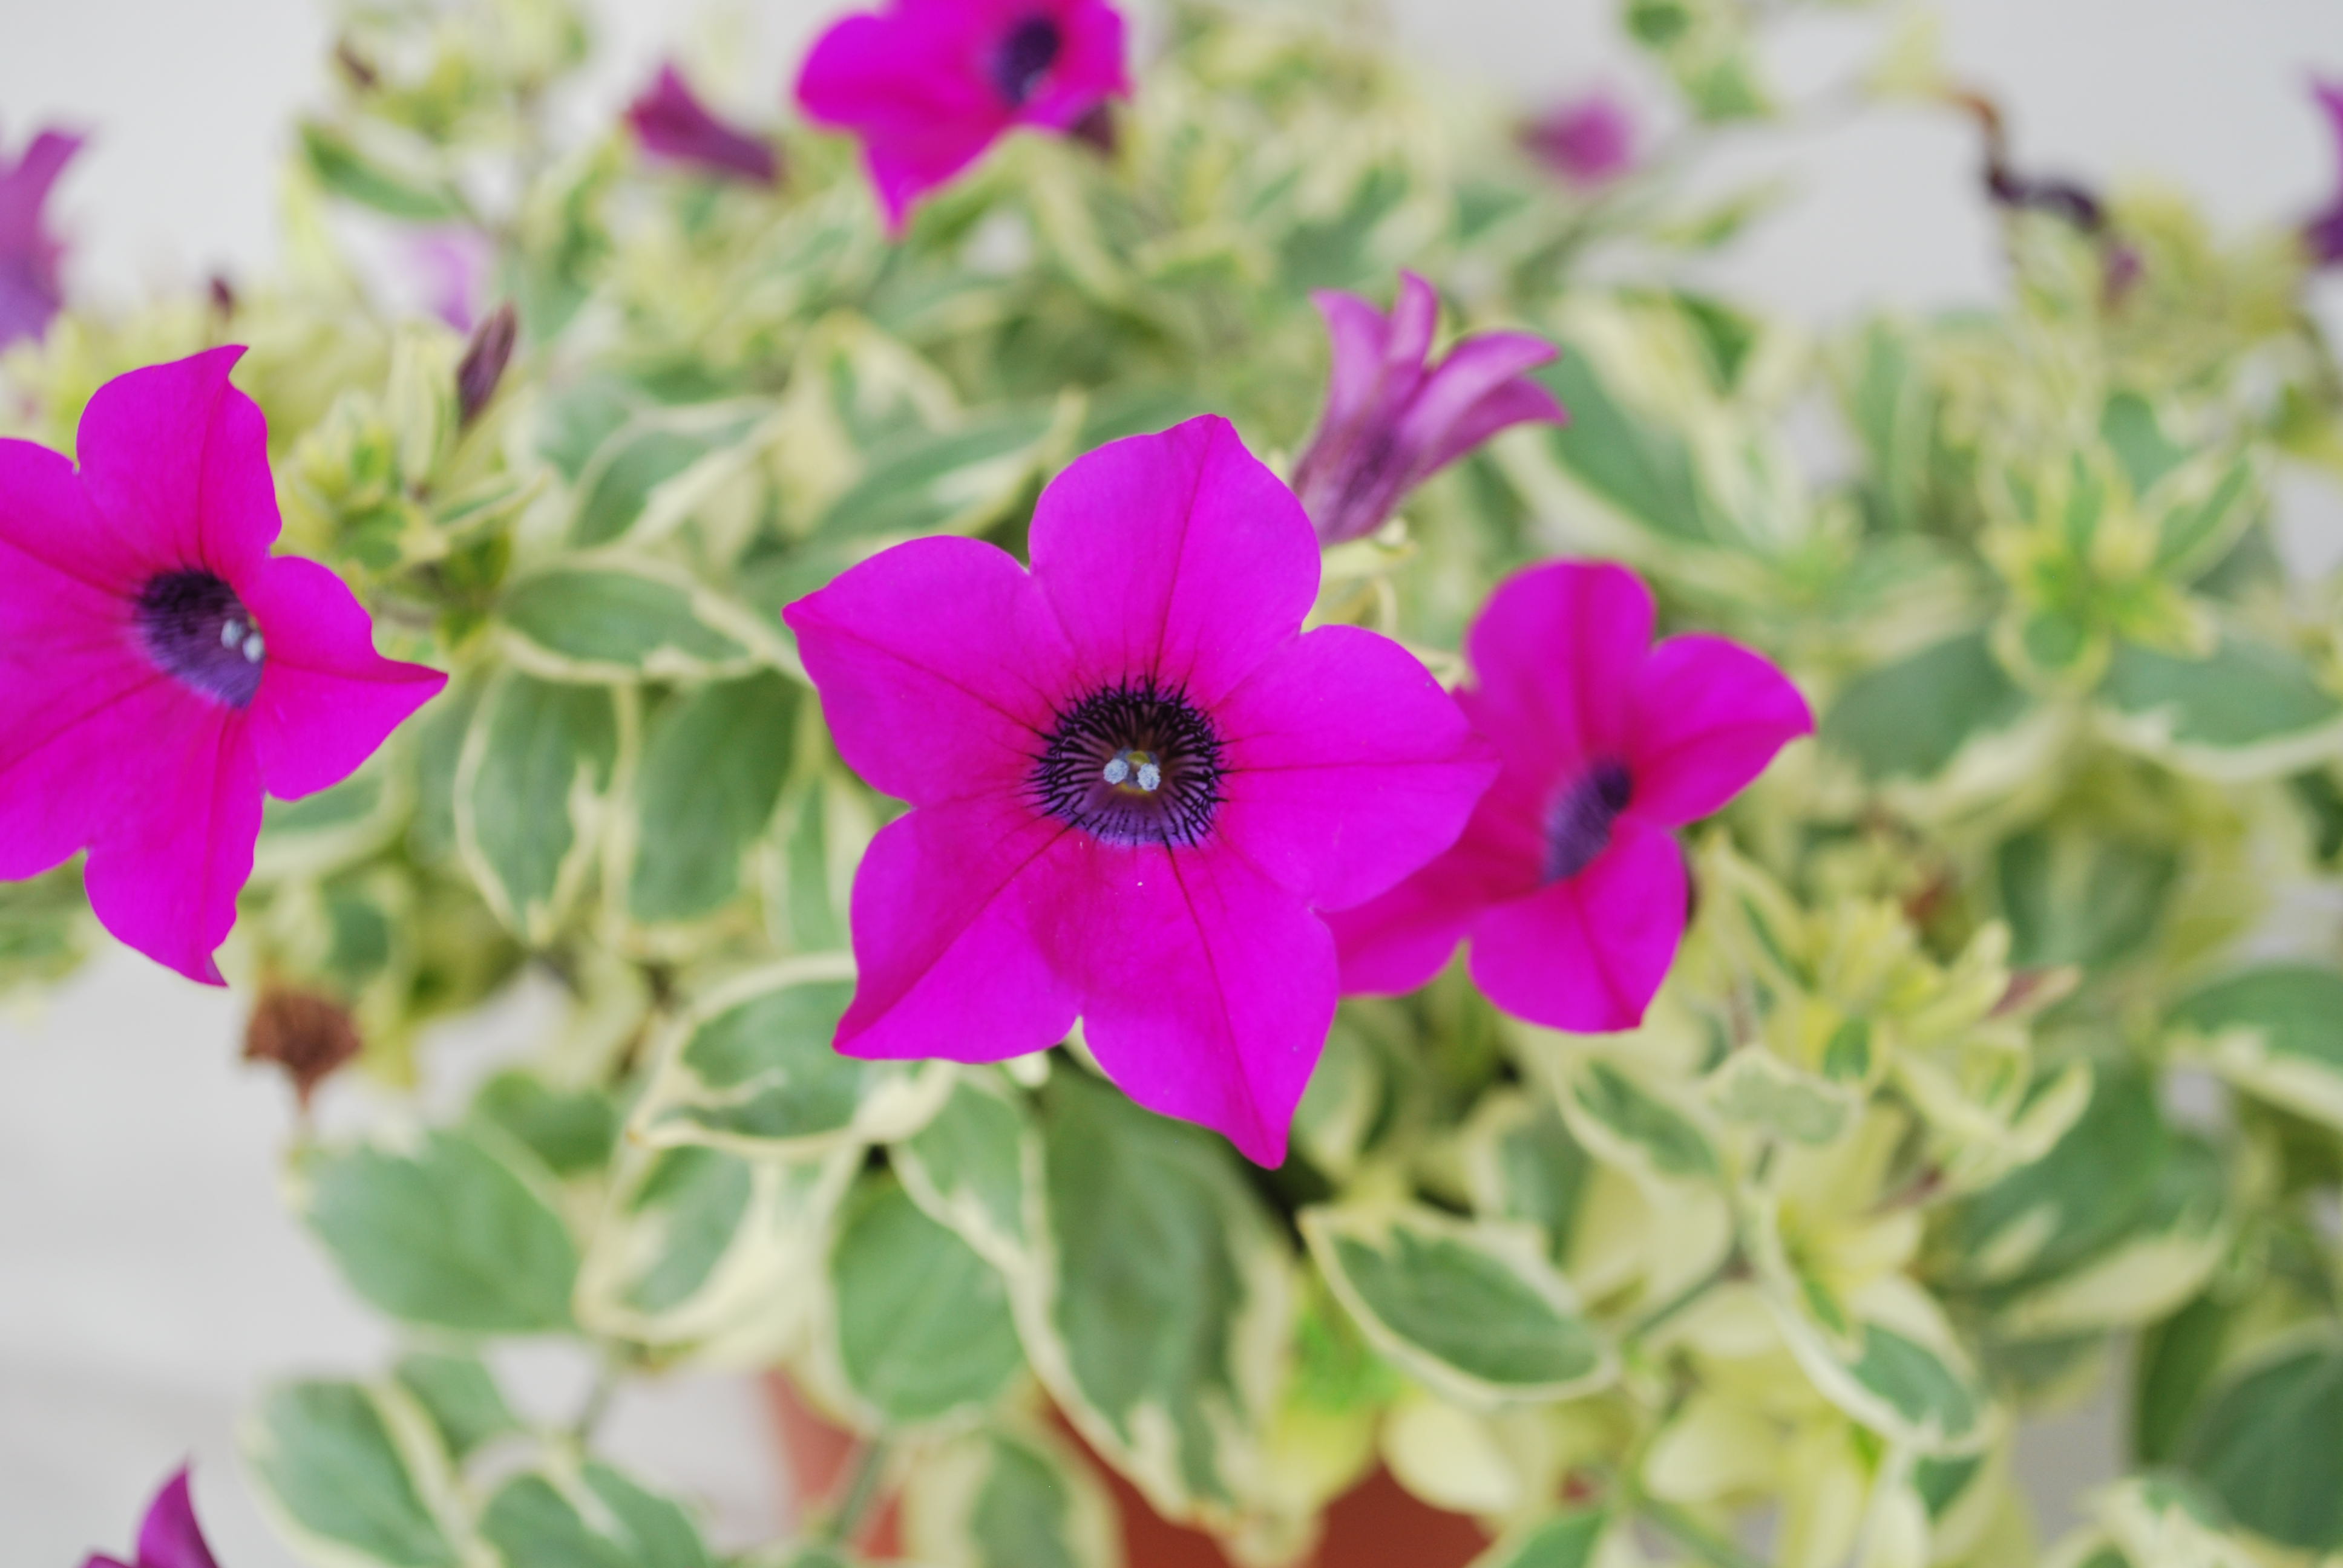 Variegated Baby Purple has just what many gardeners are looking for in a single plant – colorful blooms and foliage.